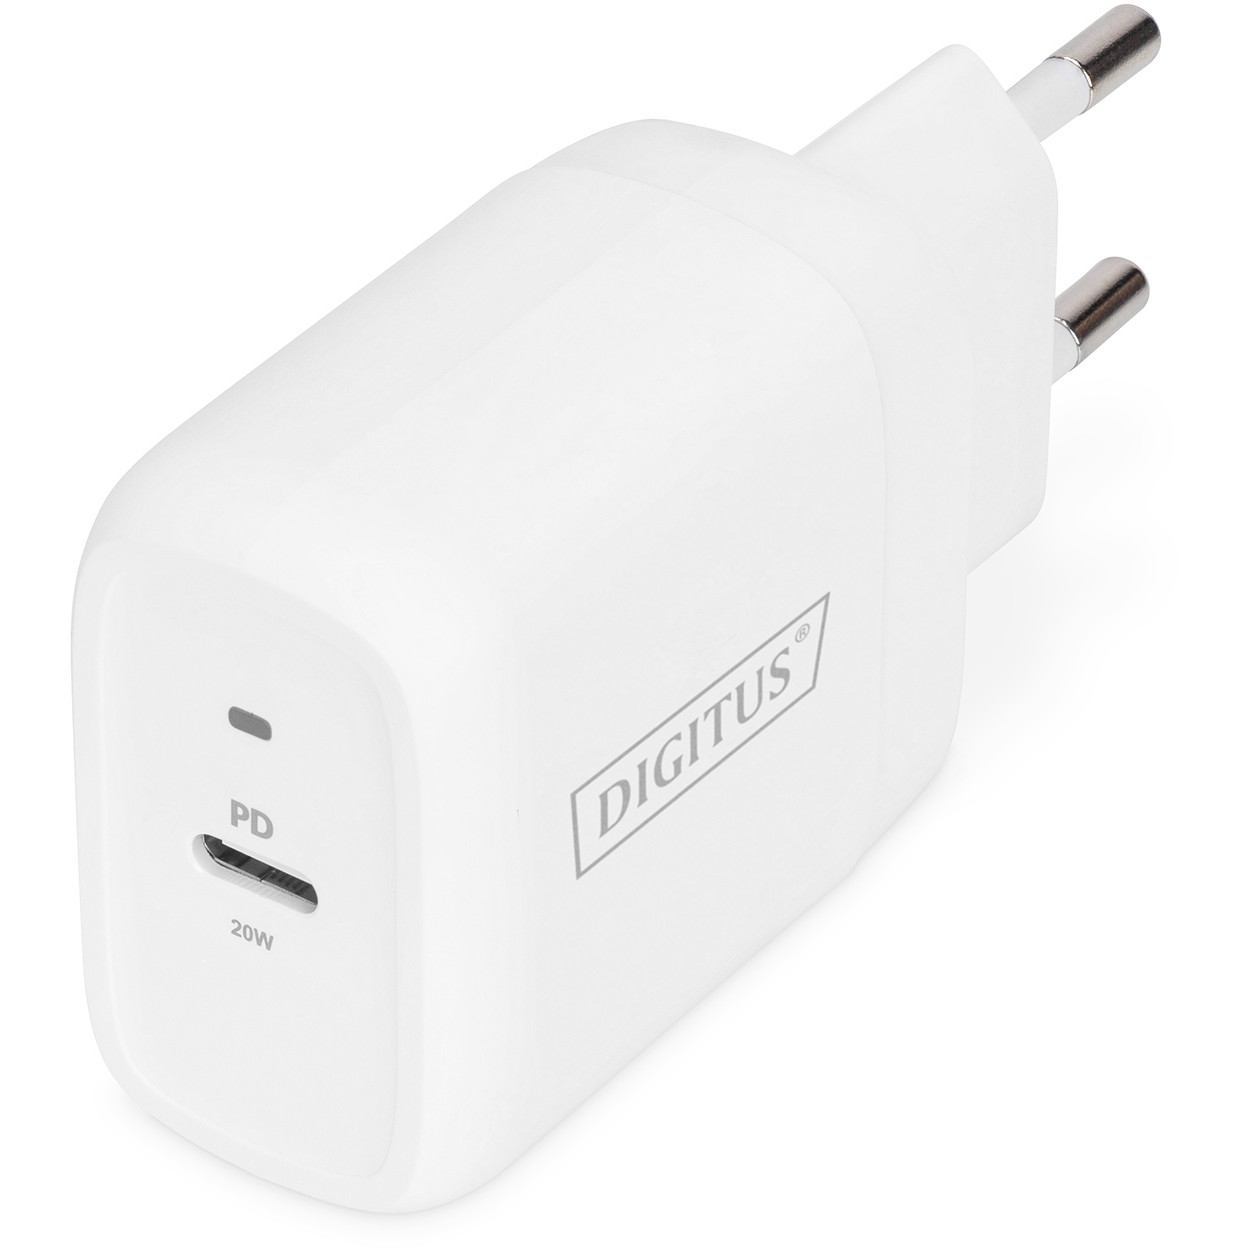 Charger USB-C DIGITUS 20W PD3.0 weiß